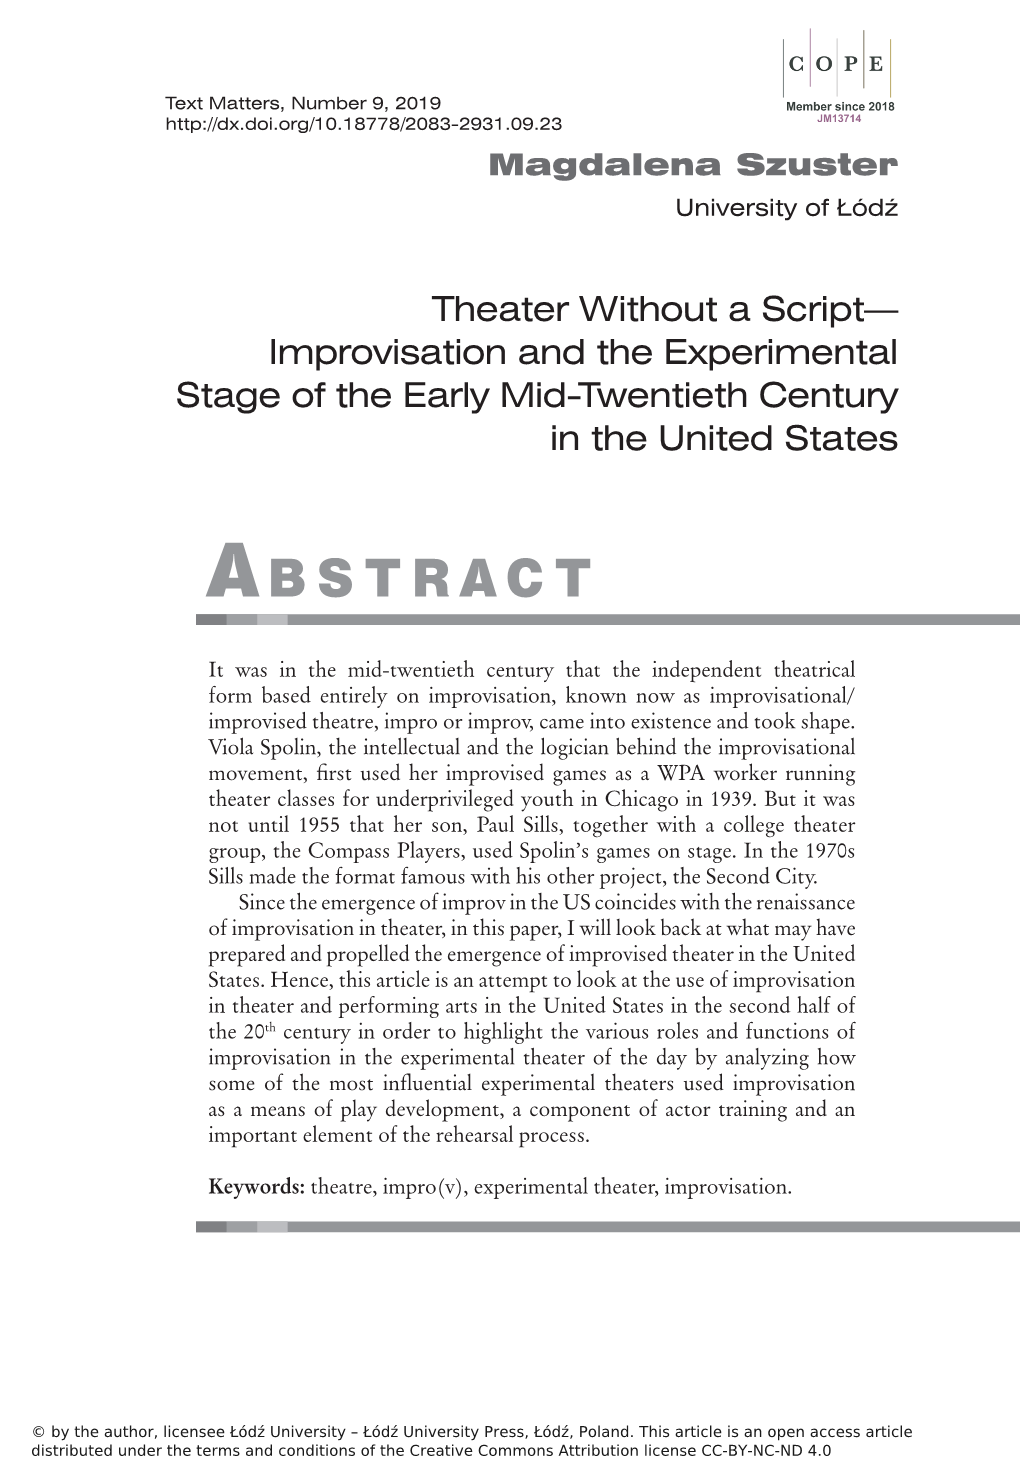 Theater Without a Script—Improvisation and The